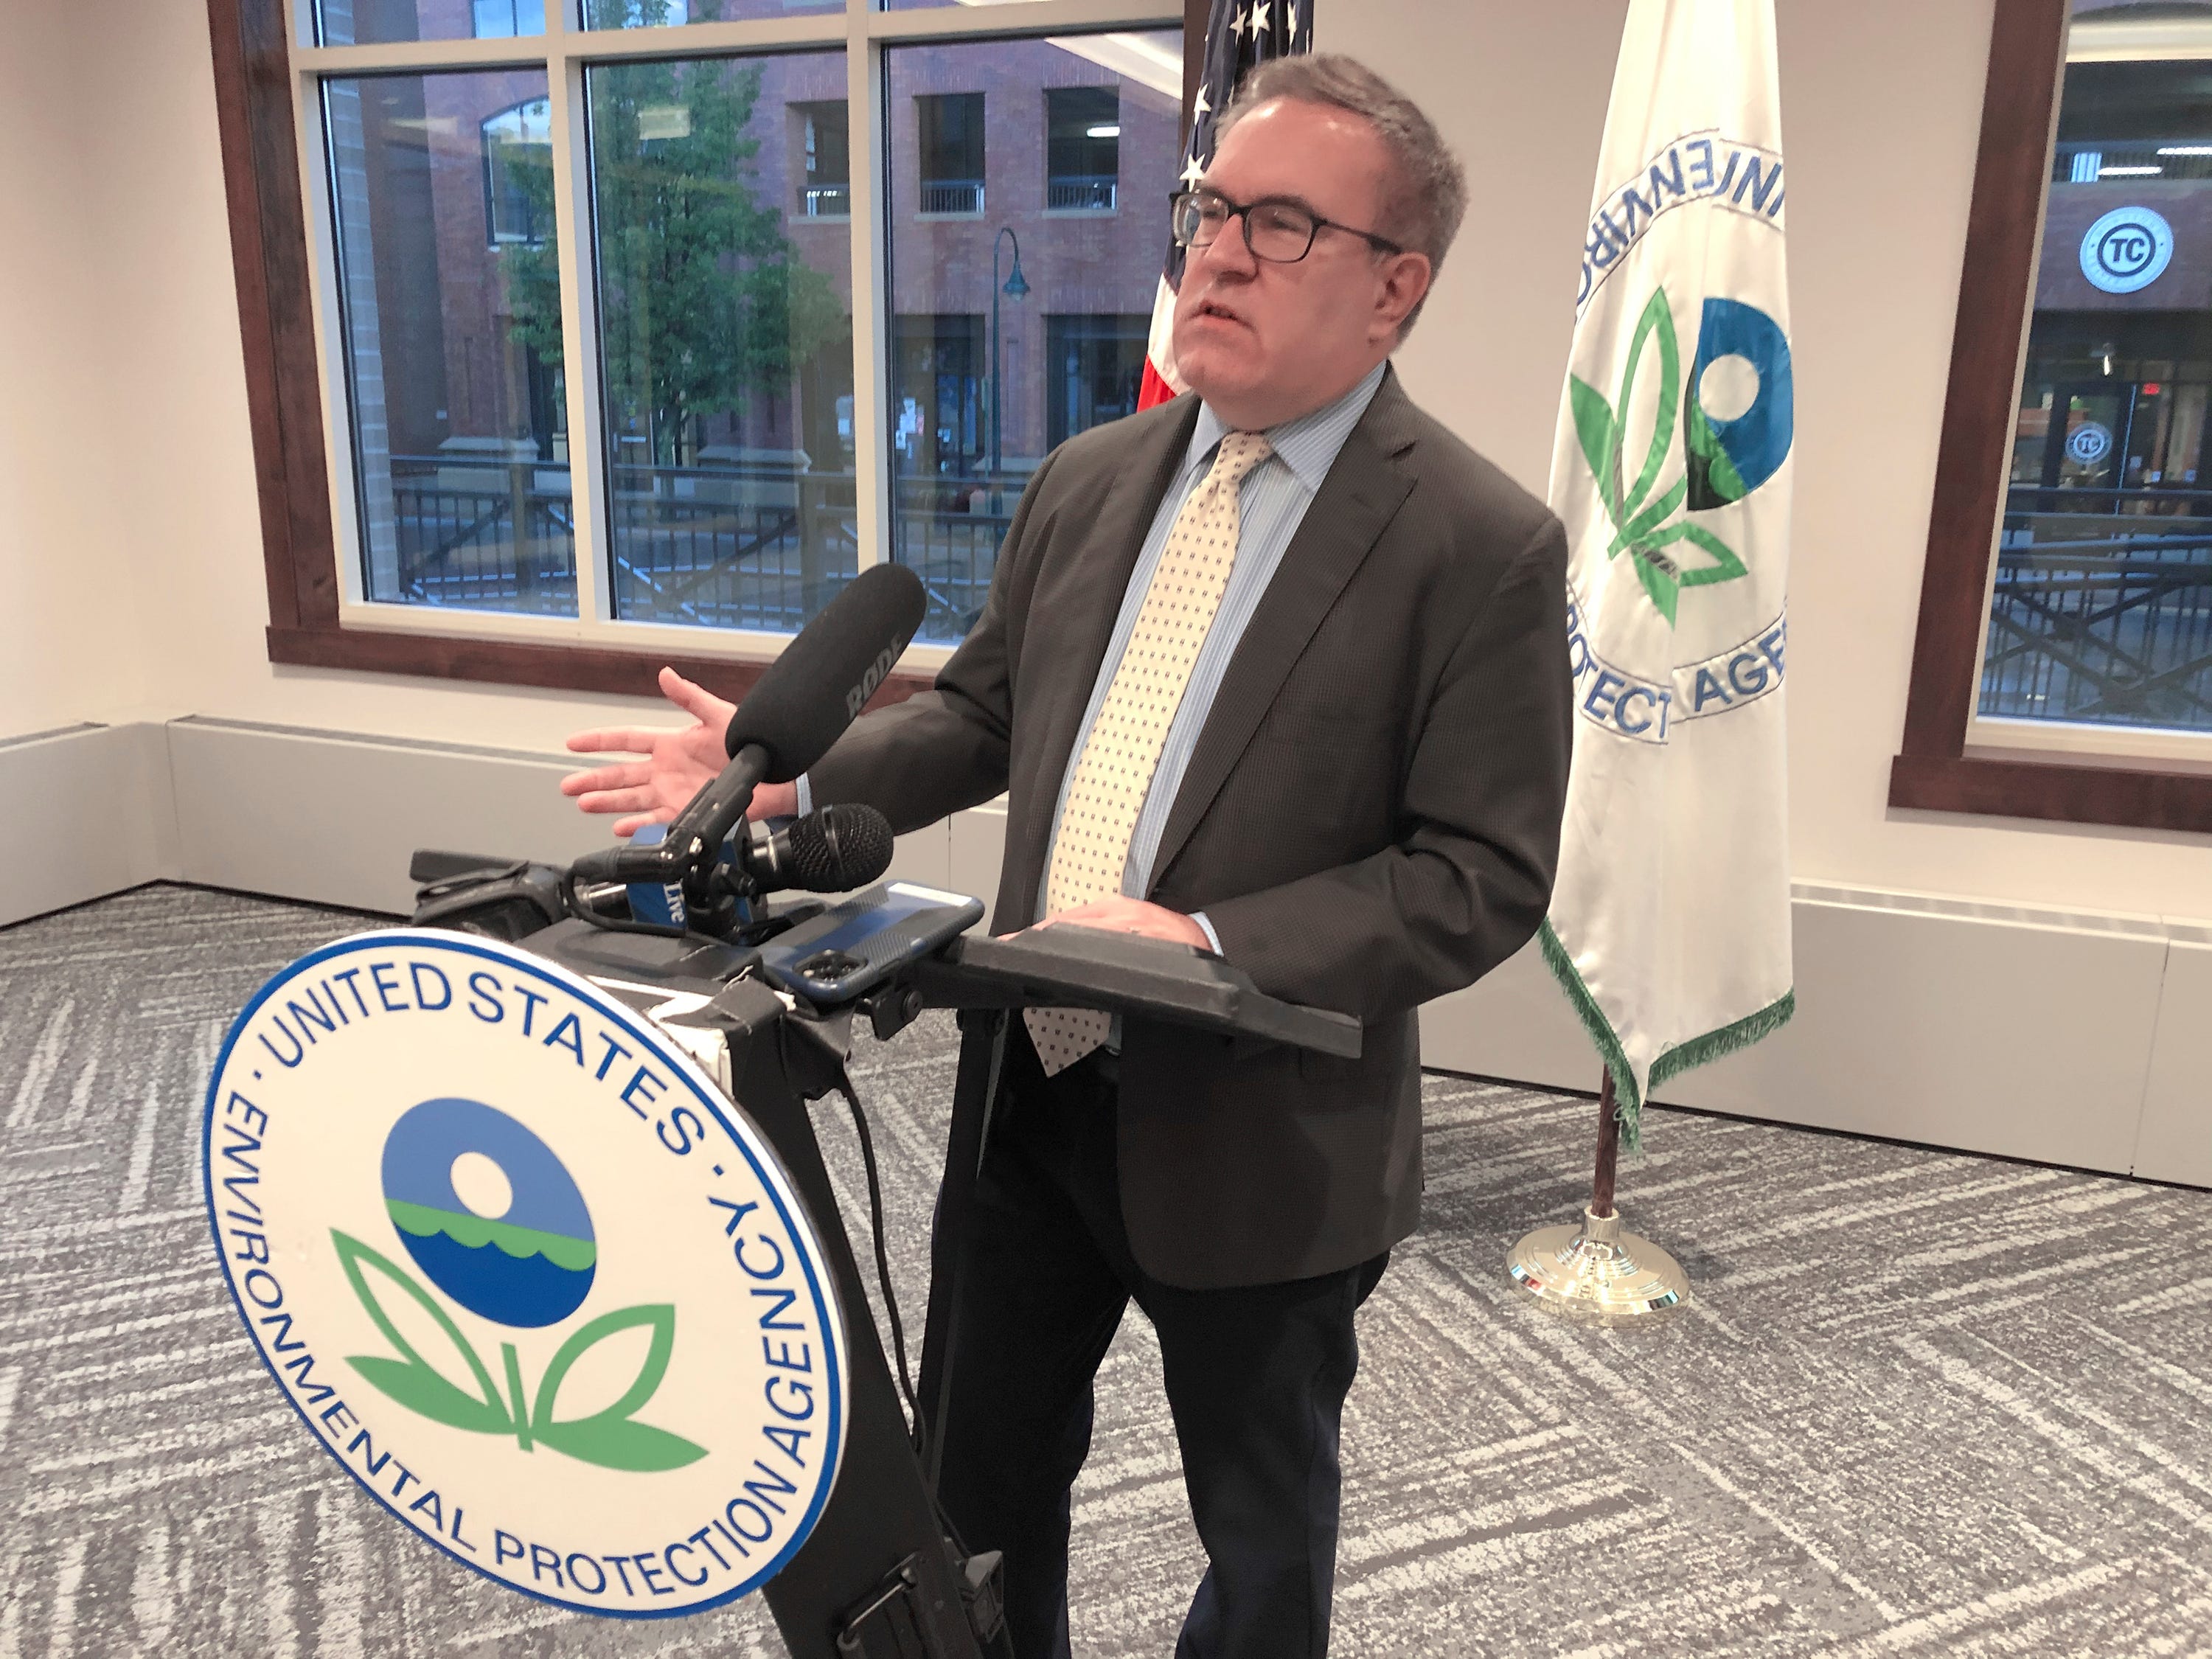 U.S. Environmental Protection Agency chief Andrew Wheeler in Traverse City, Mich., in Sept. 2020. He announced an environmental justice grant for Detroit and pledged a more community-oriented focus in a second Trump administration.